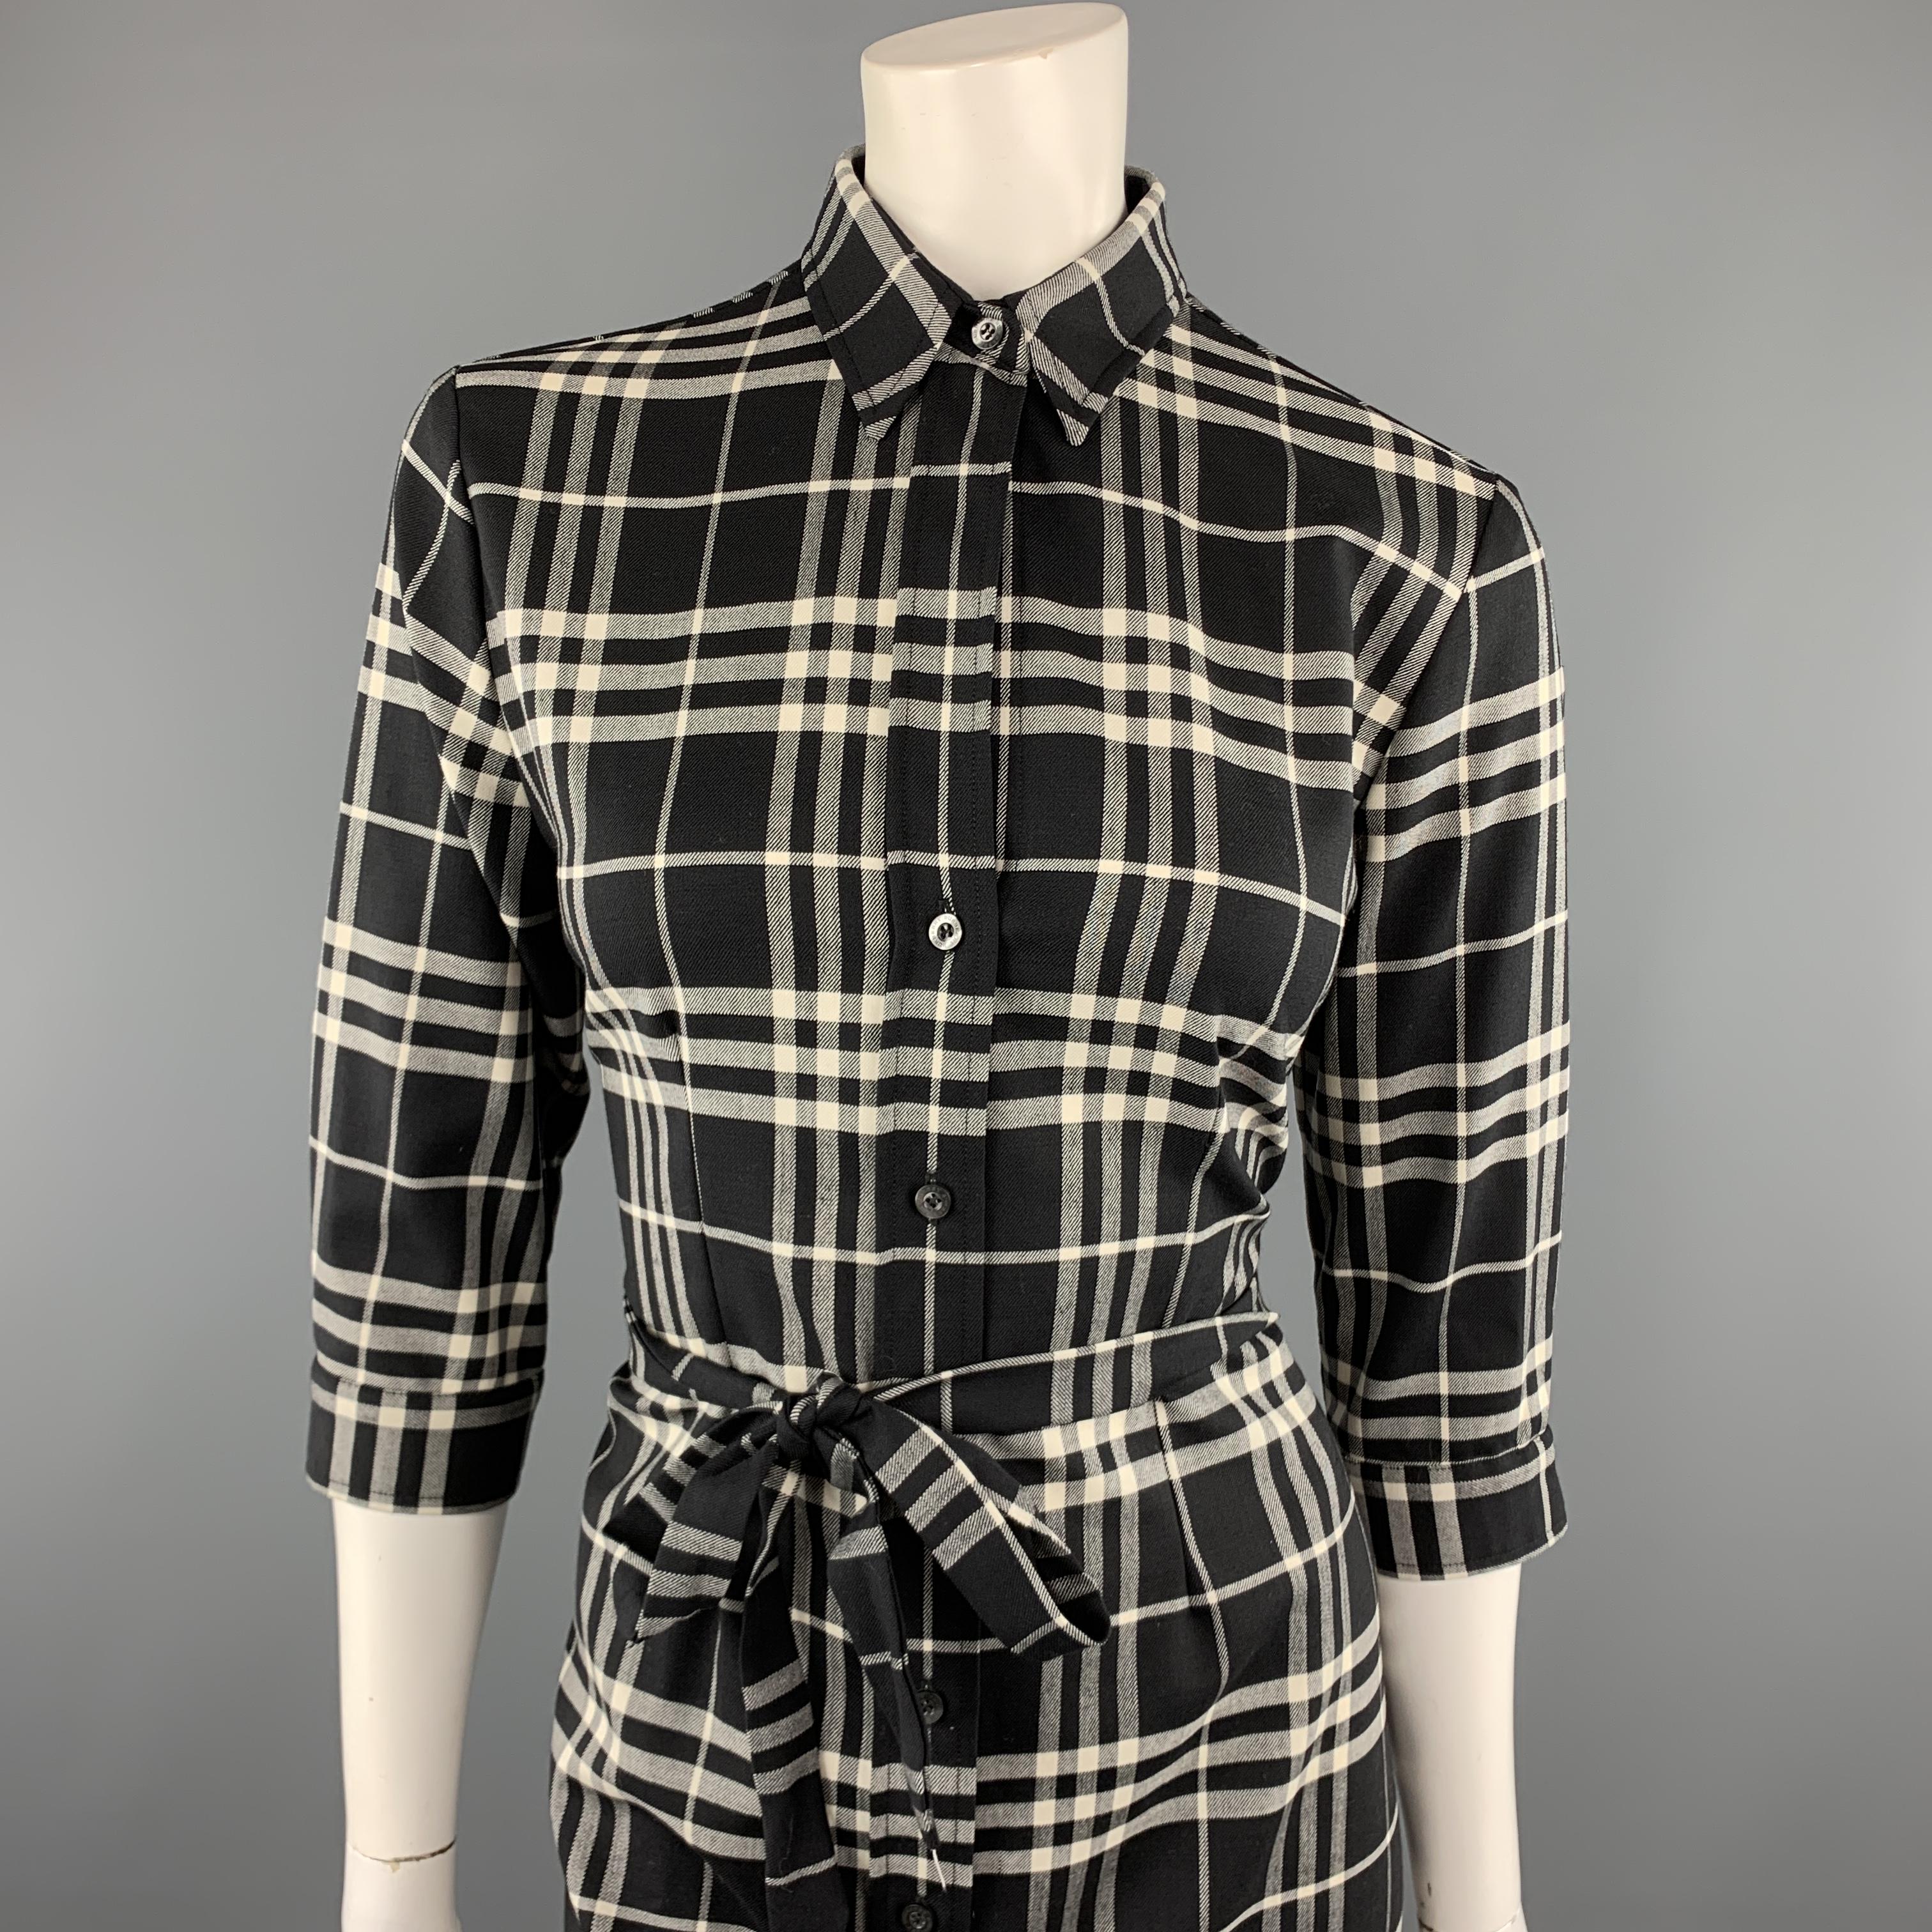 BURBERRY LONDON shirt dress comes in black and white plaid stretch wool twill with a pointed collar, three quarter sleeve, A line skirt and tied belt. Made in Italy.

Excellent Pre-Owned Condition.
Marked: 6

Measurements:

Shoulder: 15 in.
Bust: 38